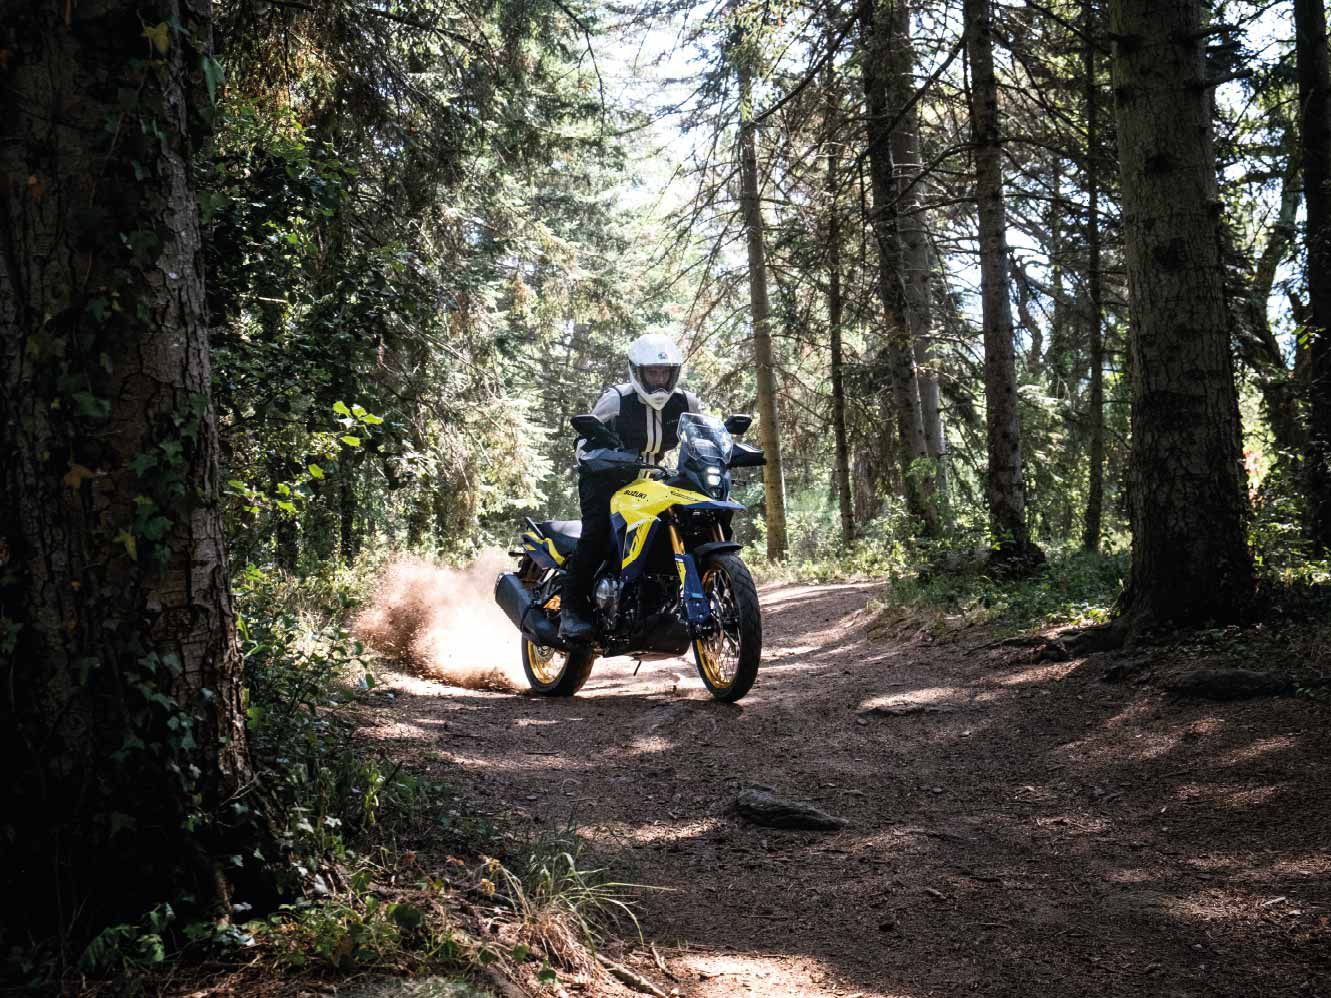 According to Suzuki, worldwide sales of the V-Strom are upwards of 440,000 units. The new V-Strom 800DE and Adventure aim to increase that number.